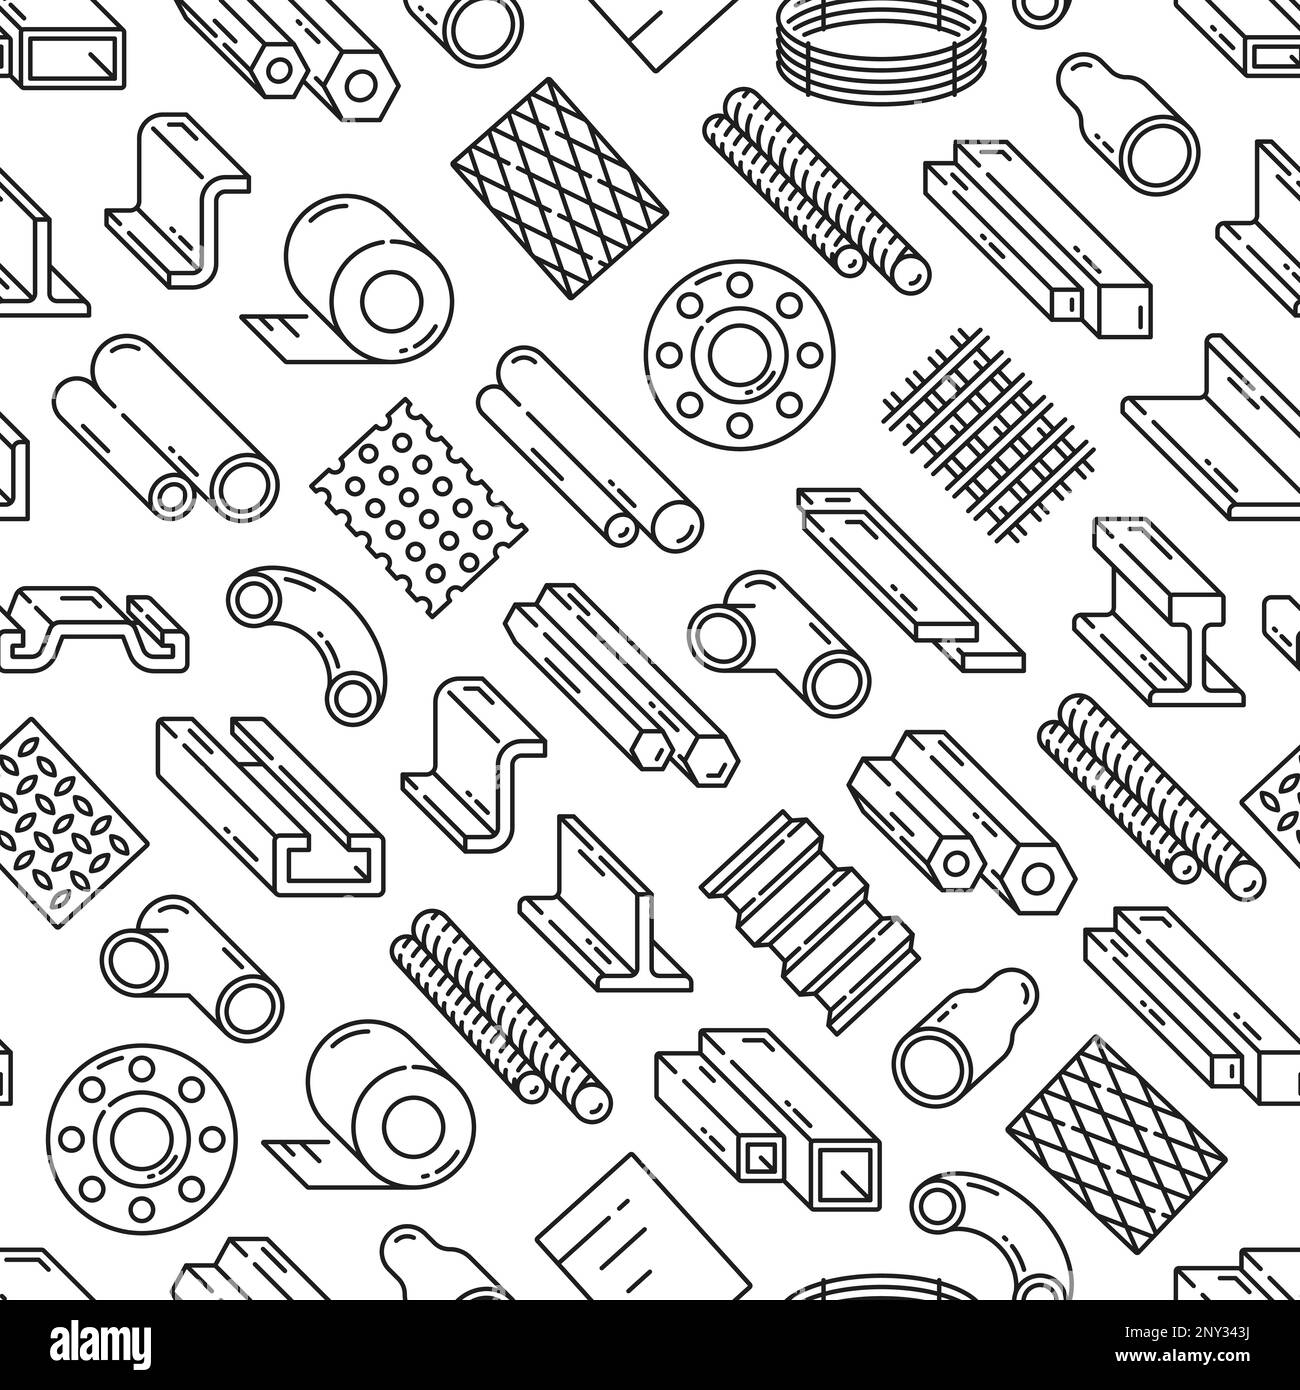 Steel and aluminum rolled metal seamless pattern. Vector repeated background with construction thin line elements pipe, rail, bar, tube or mesh profiles. Tiled backdrop with metallurgy industry items Stock Vector